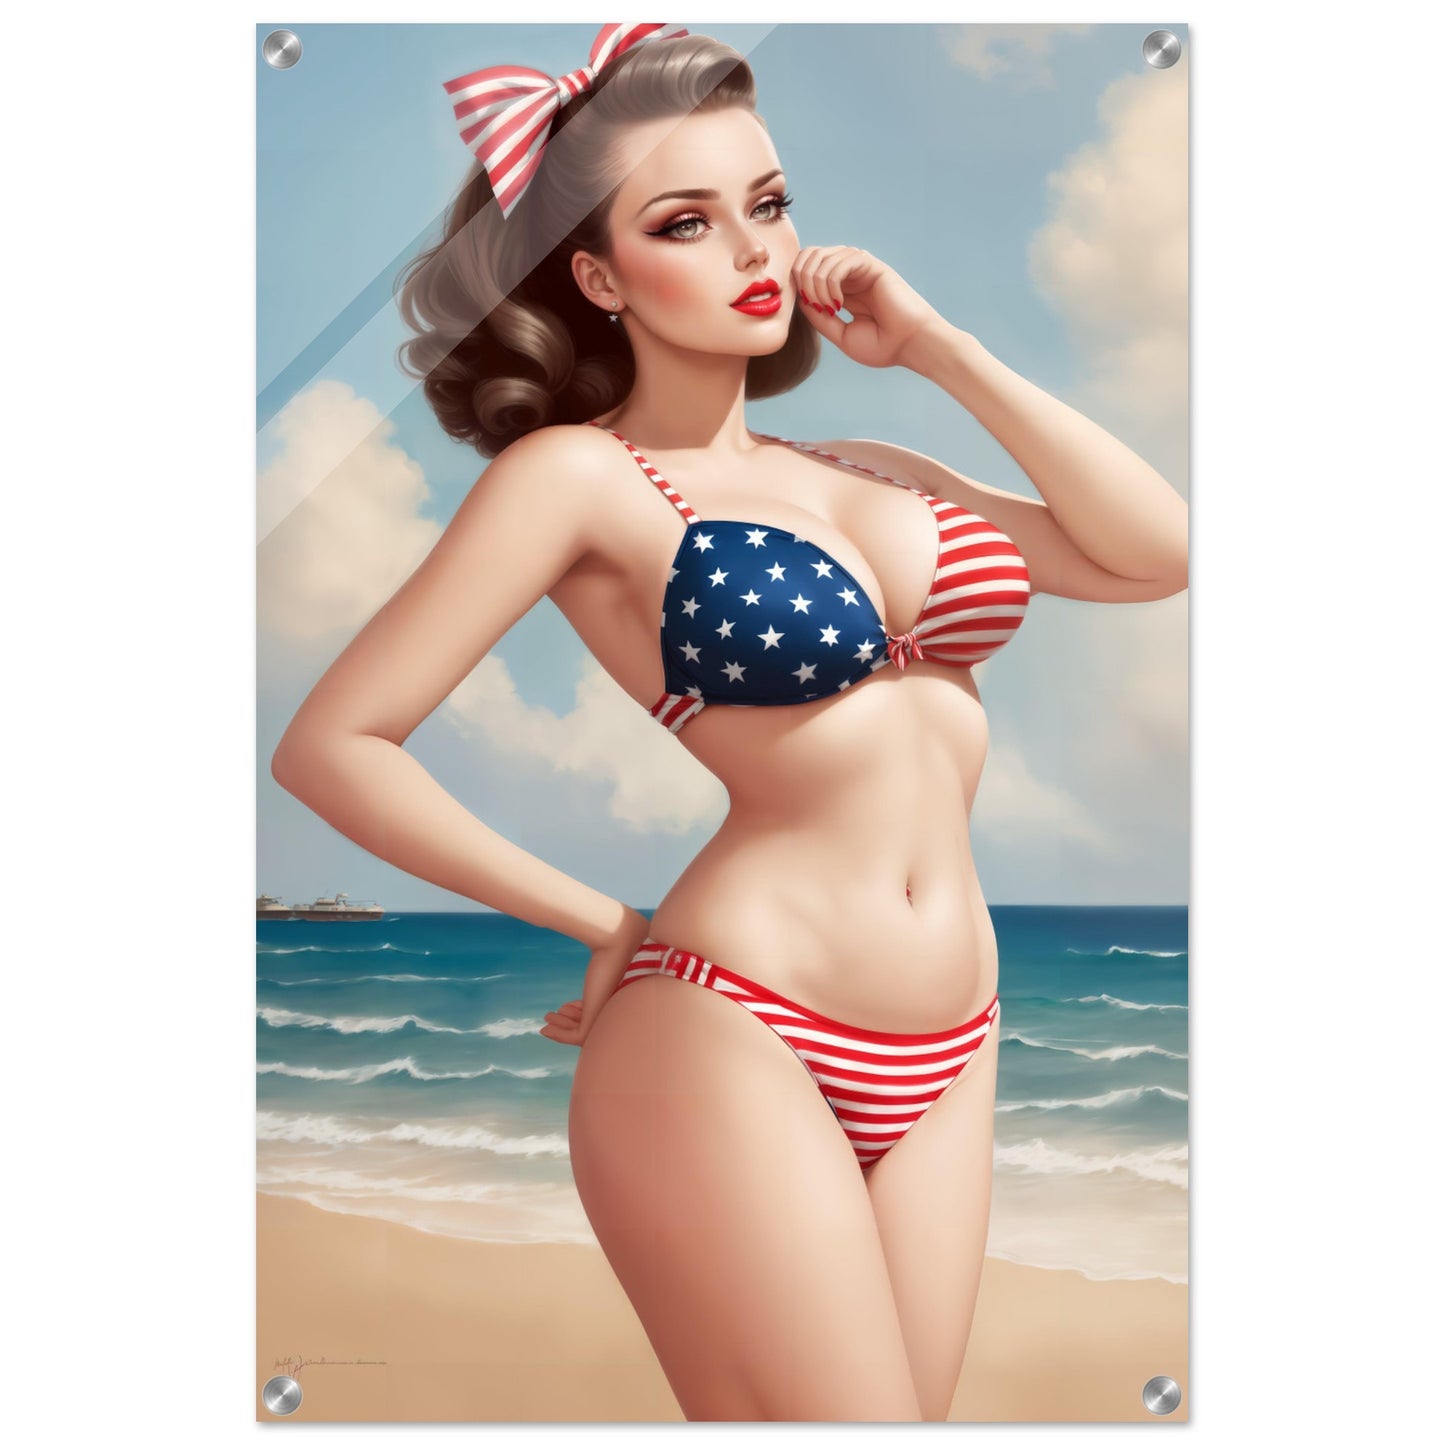 The Daily Pinup #103 - Stars & Stripes Wall Art